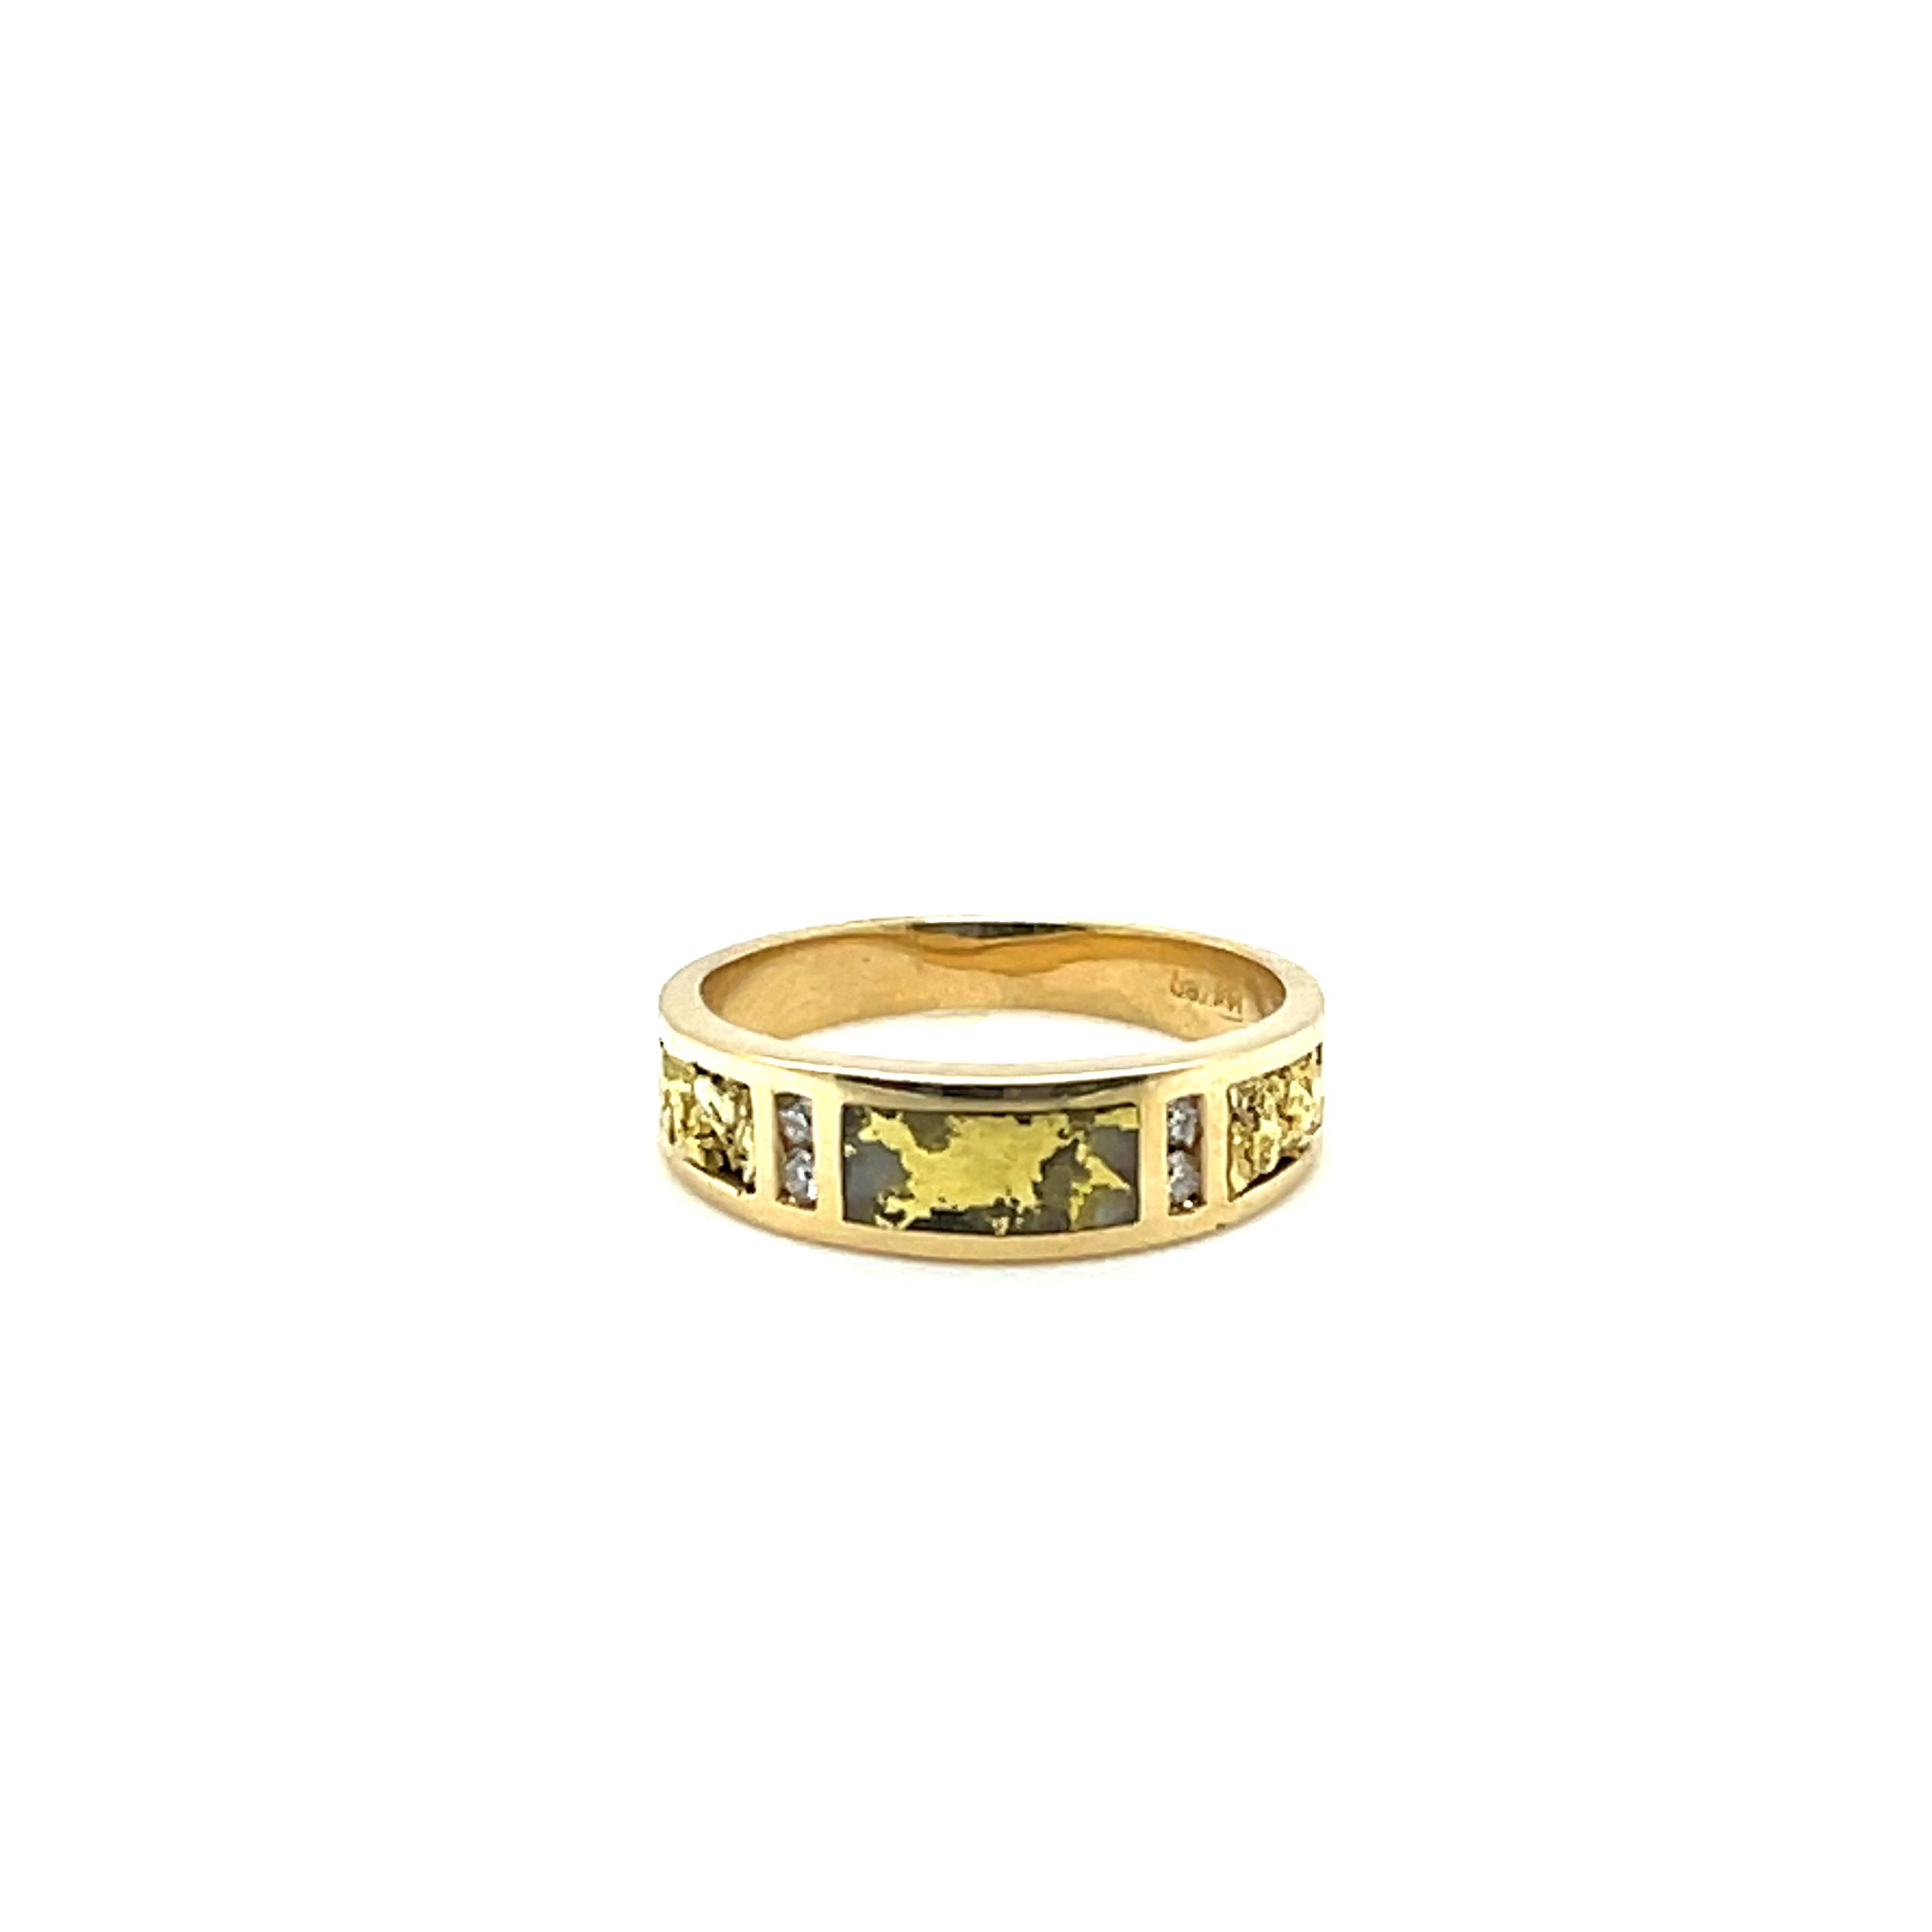 14k YG w/ Gold Quartz and Diamond Inlay Ring by Peter Fisher